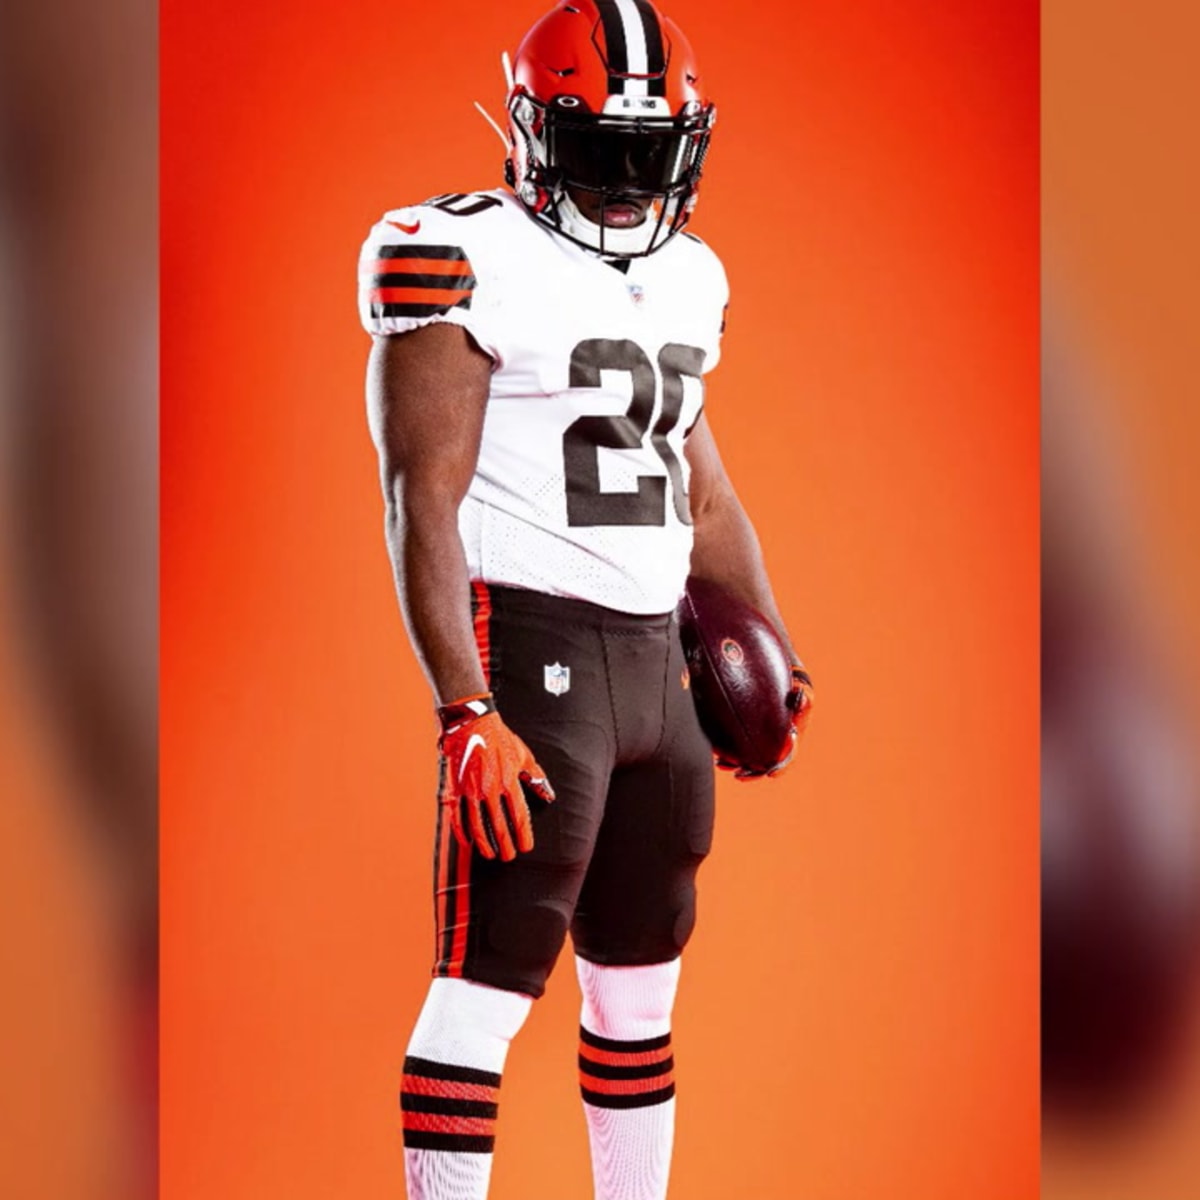 cleveland browns brown jersey